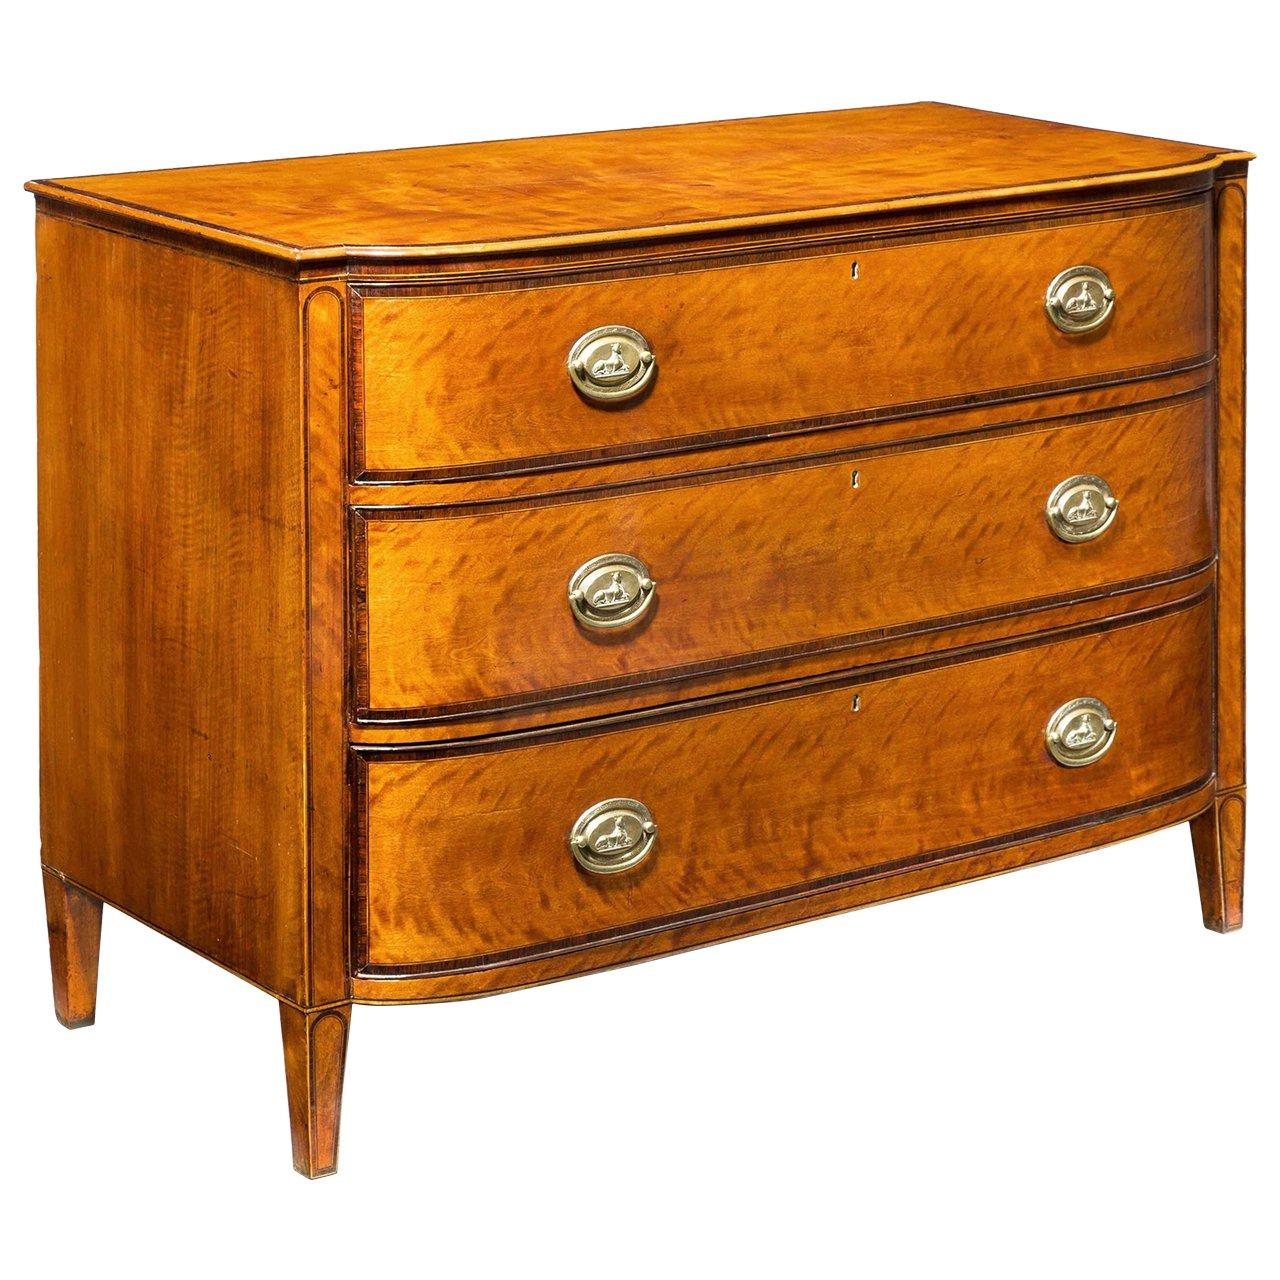 George III Period Satinwood Chest of Drawers